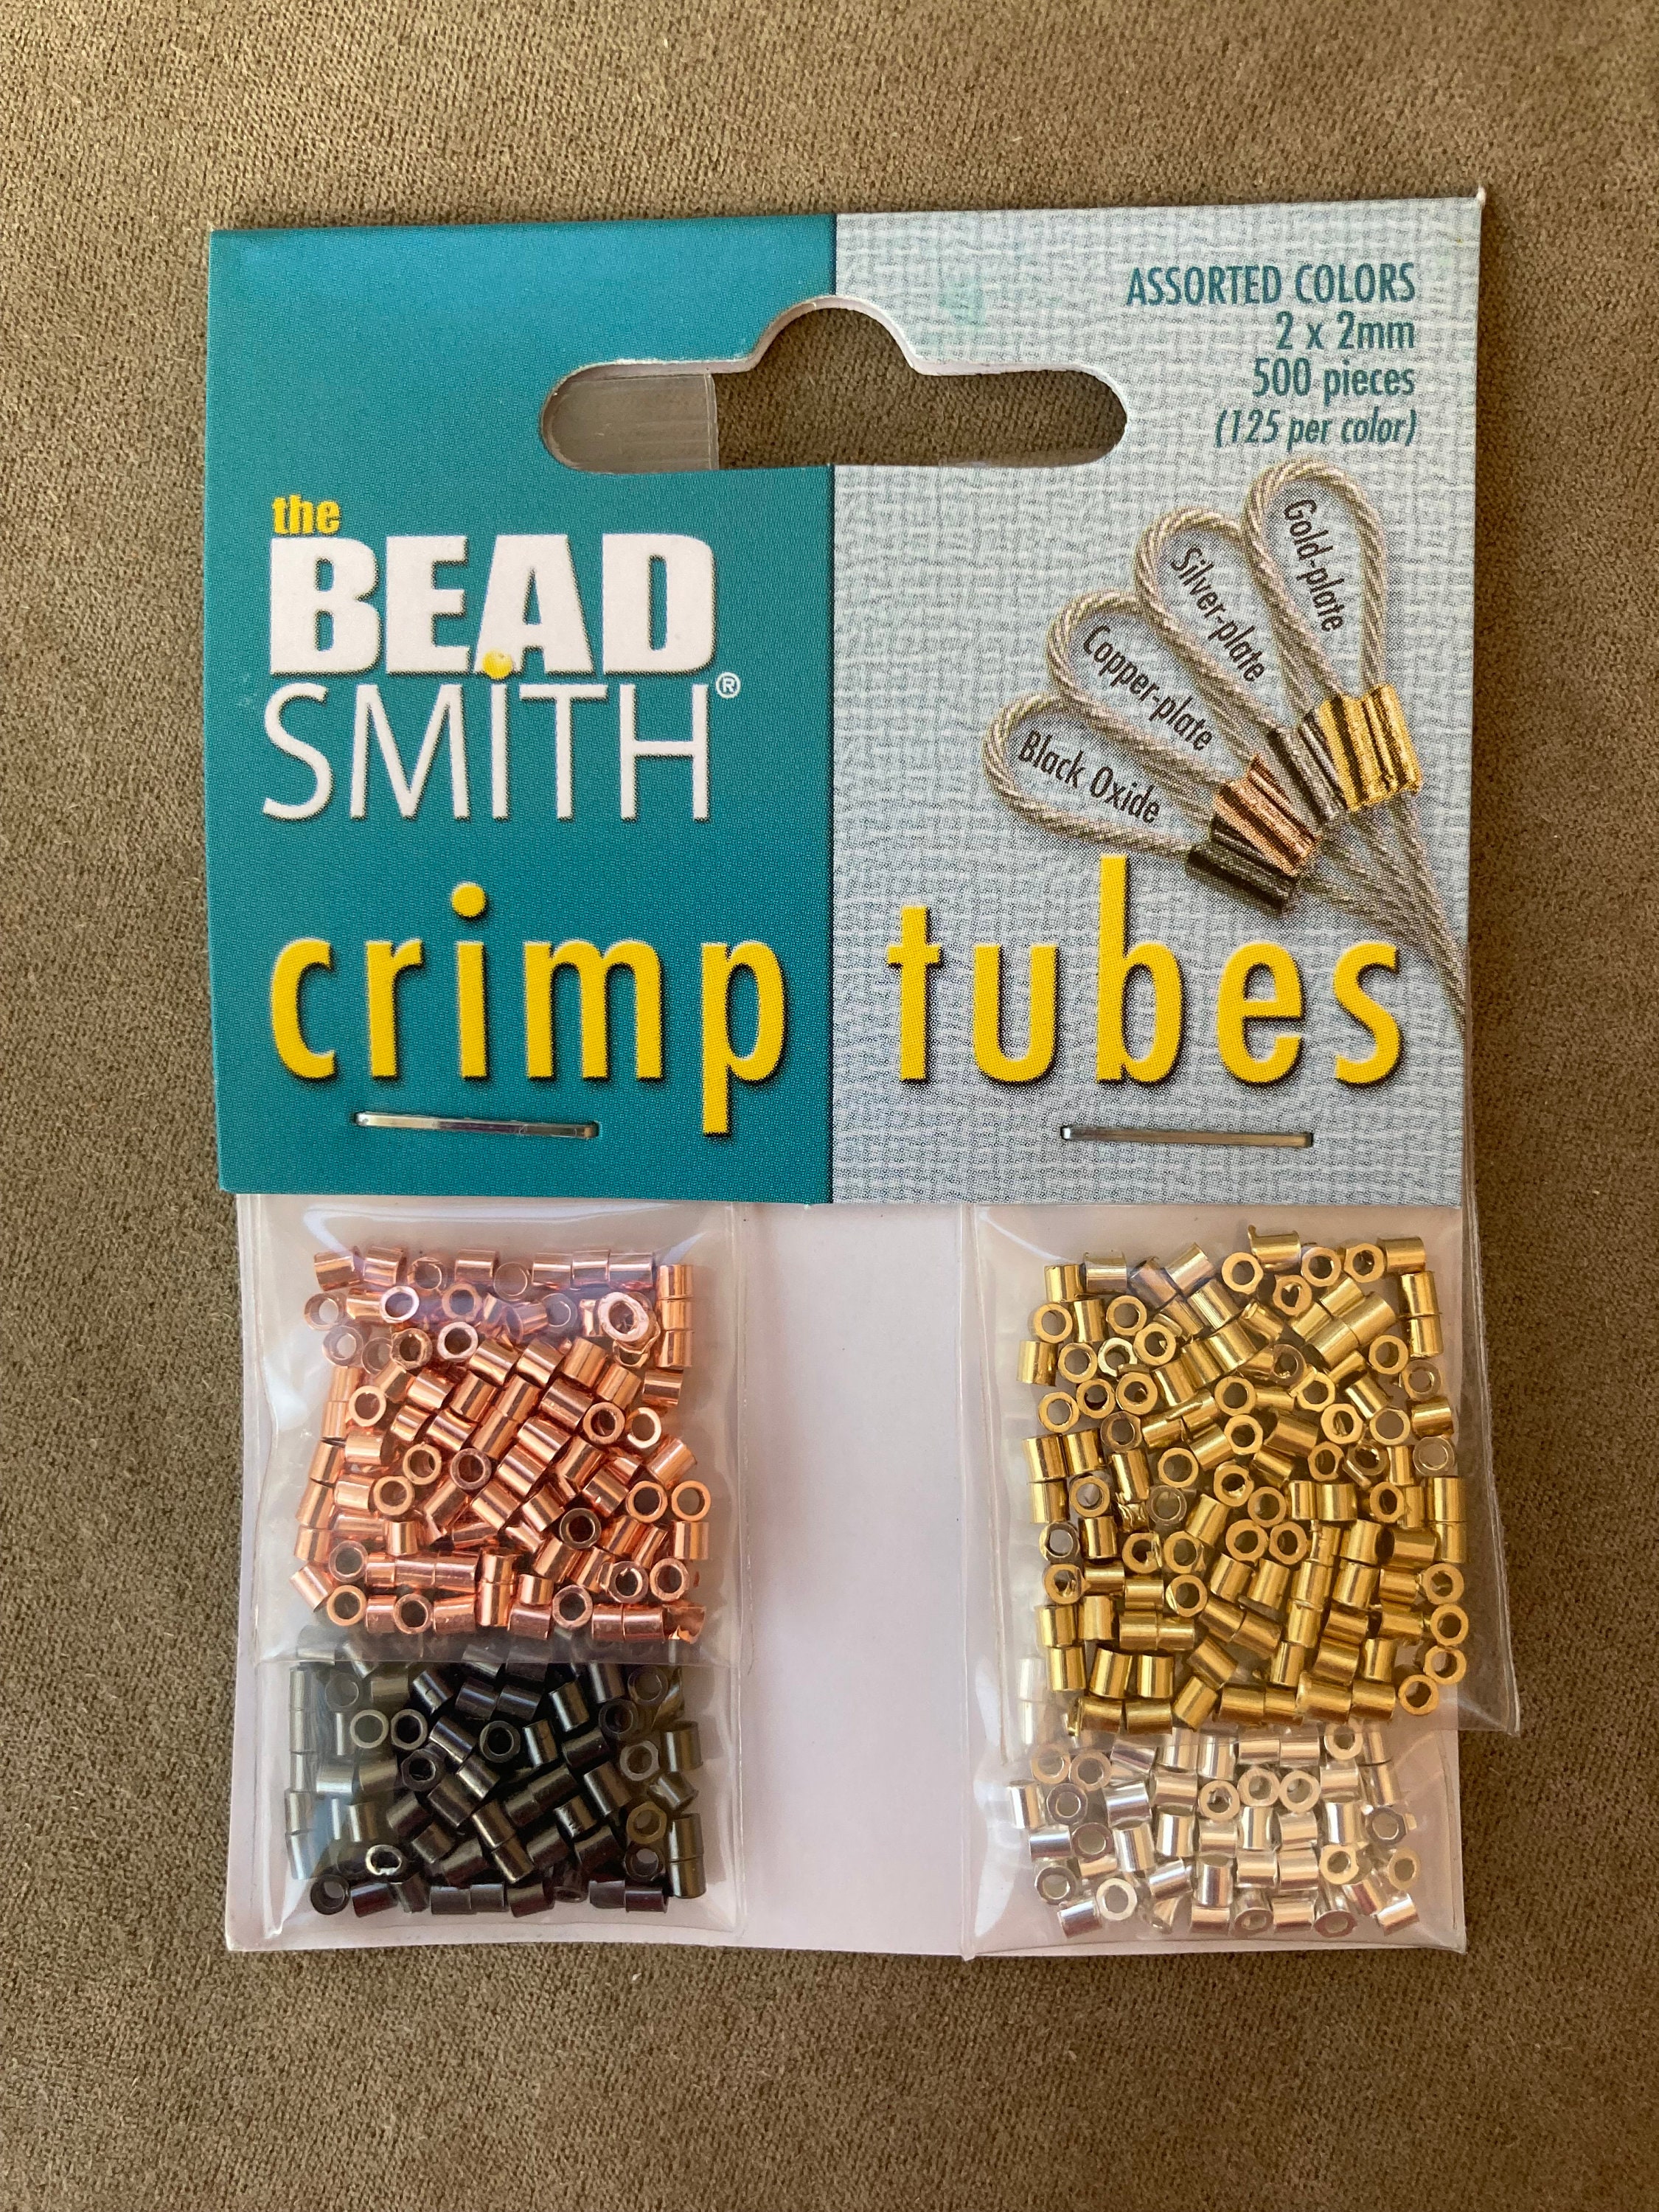 Basic Elements Crimp Tube Beads & Stardust Crimp Covers, 2x2mm and 4mm,  Silver Plated (48 Pieces) — Beadaholique